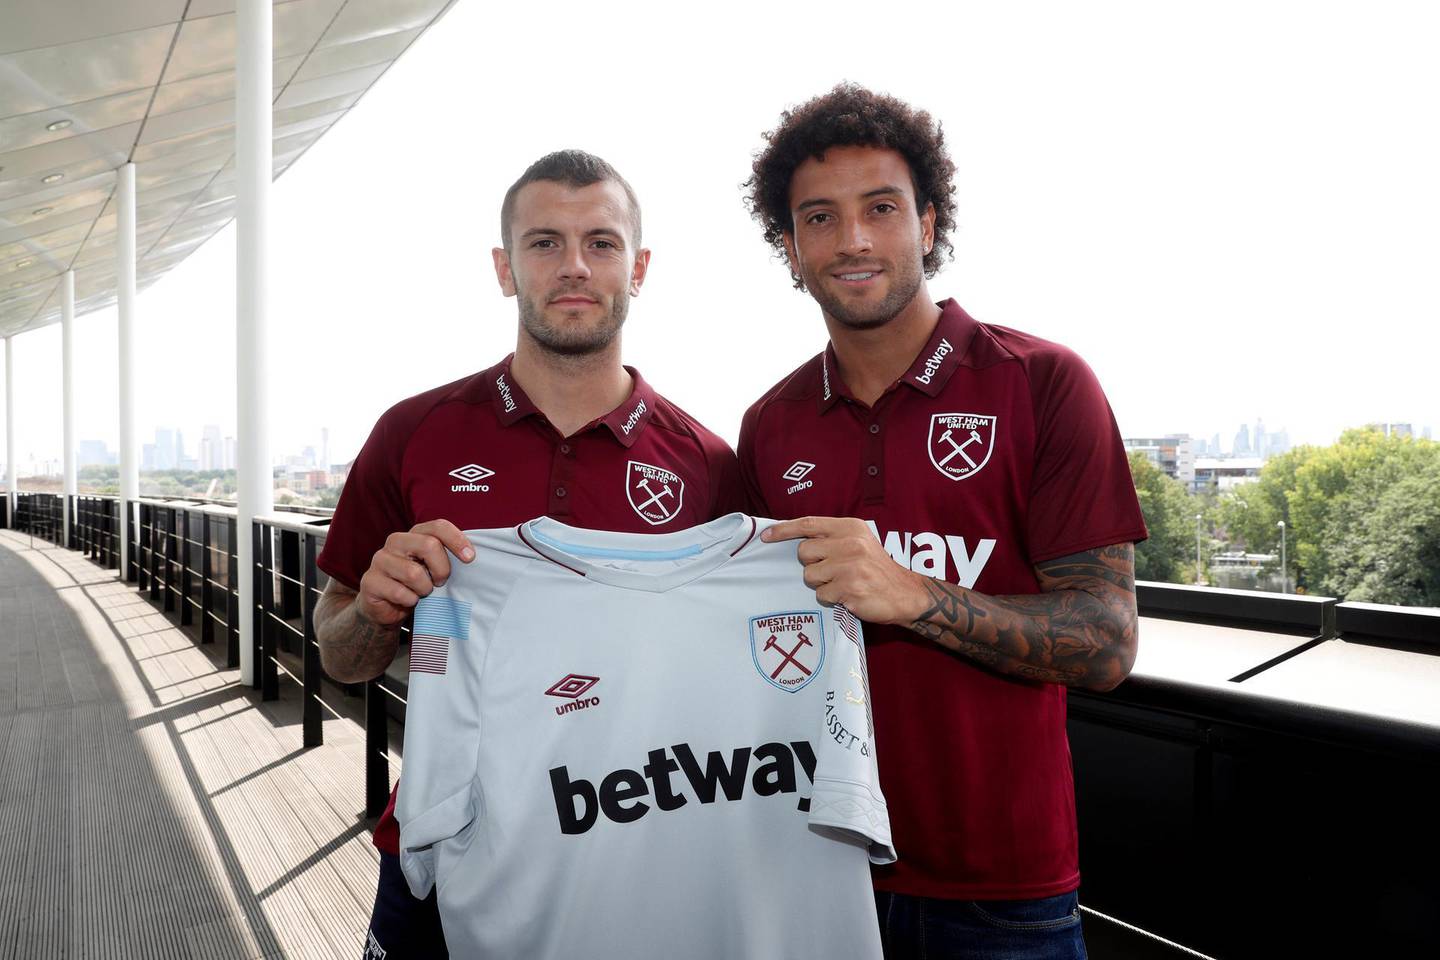 Soccer Football - West Ham United Press Conference - London Stadium, London, Britain - July 24, 2018   West Ham's Jack Wilshere and Felipe Anderson pose after the press conference   Action Images via Reuters/Matthew Childs